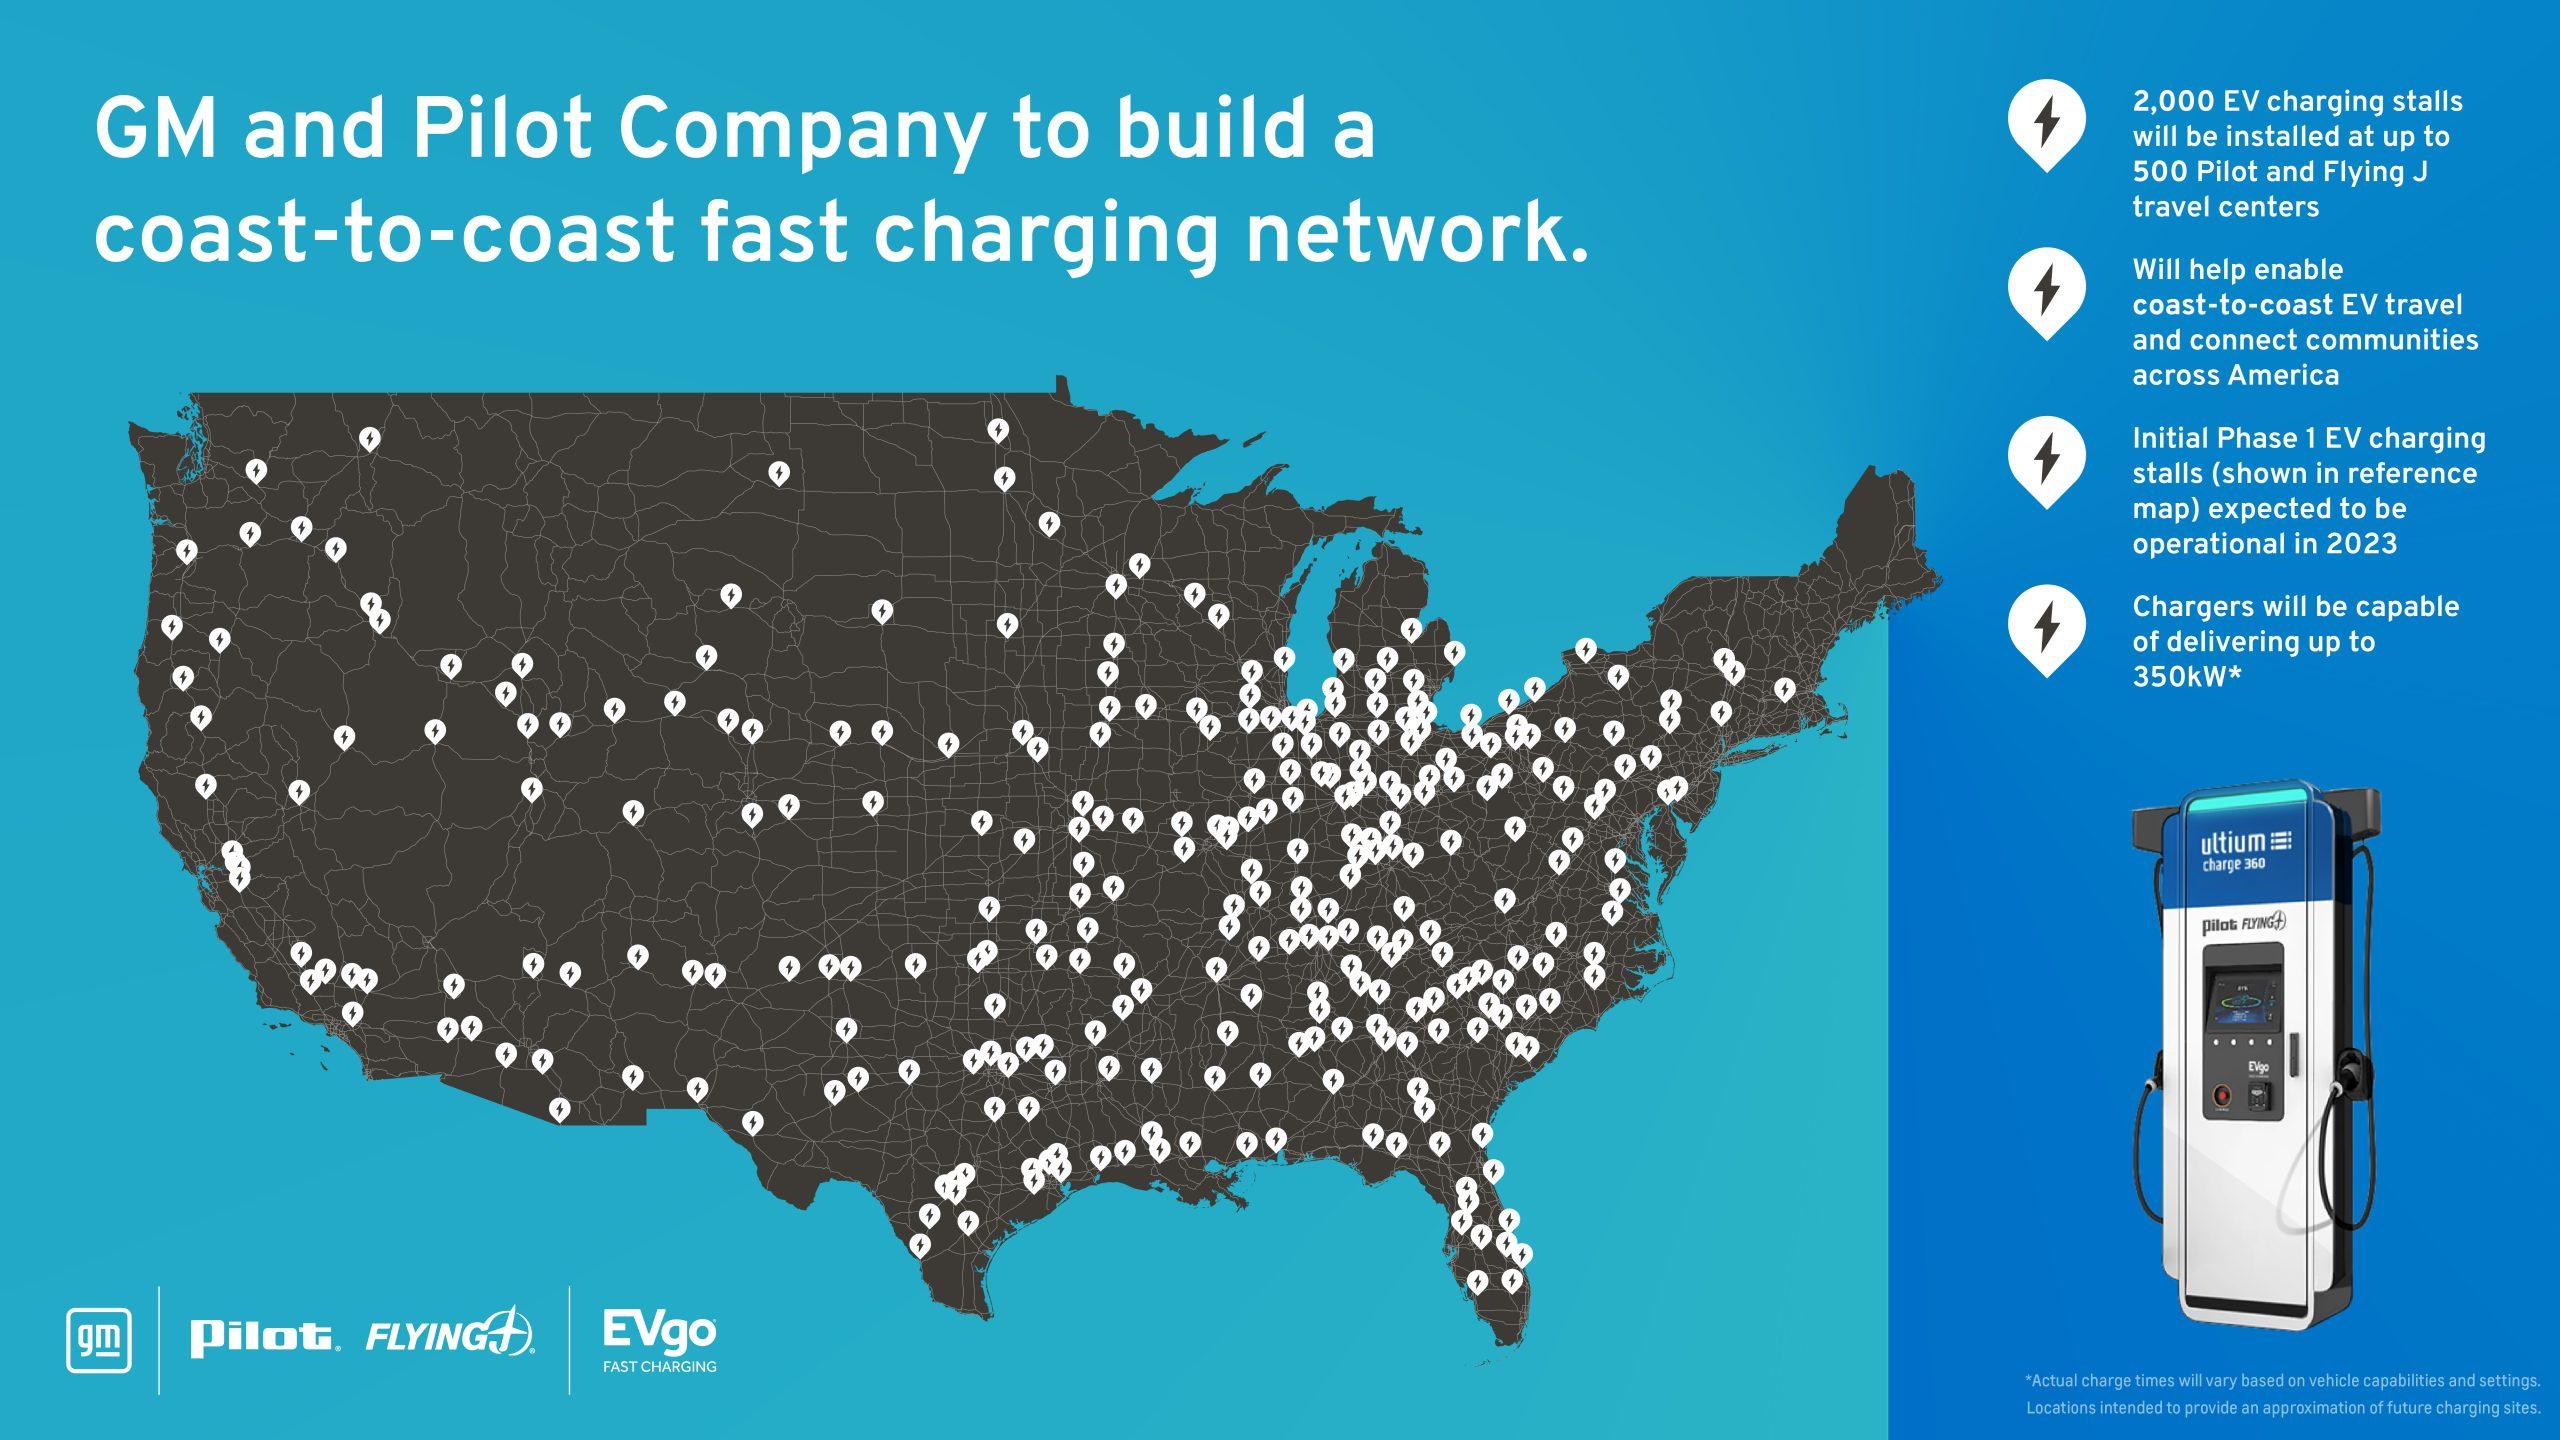 Ford F-150 Lightning Great News-- GM/Pilot will build 2000 EvGO chargers at 500 locations along US Highways GM-and-Pilot-Company-to-Build-Out-Coast-to-Coast-EV-Fast-Charging-Network-Infographic-scaled